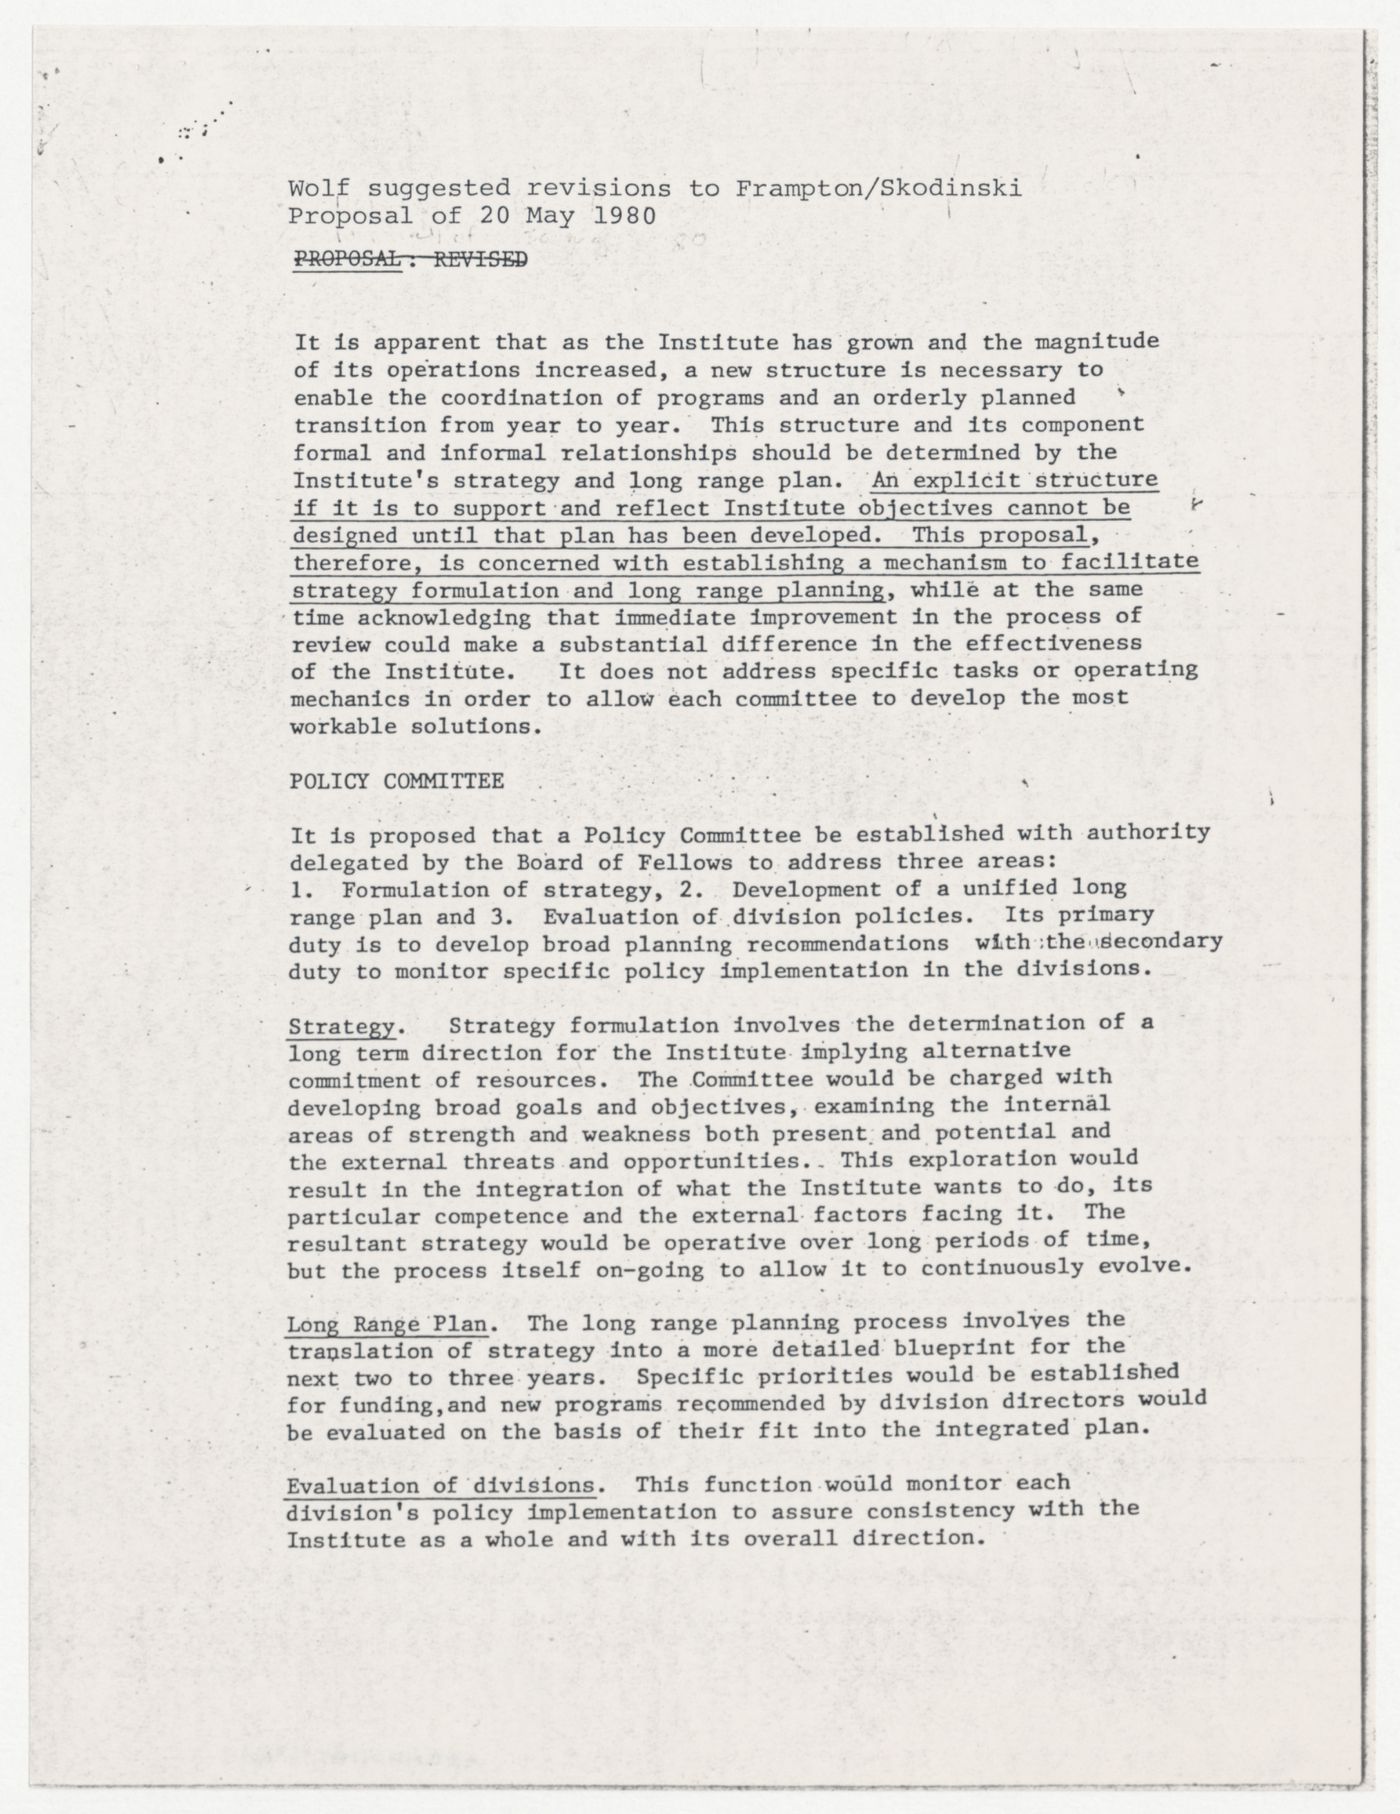 Memorandum from Peter Wolf to the Fellows about suggested revisions to proposal to form a policy committee